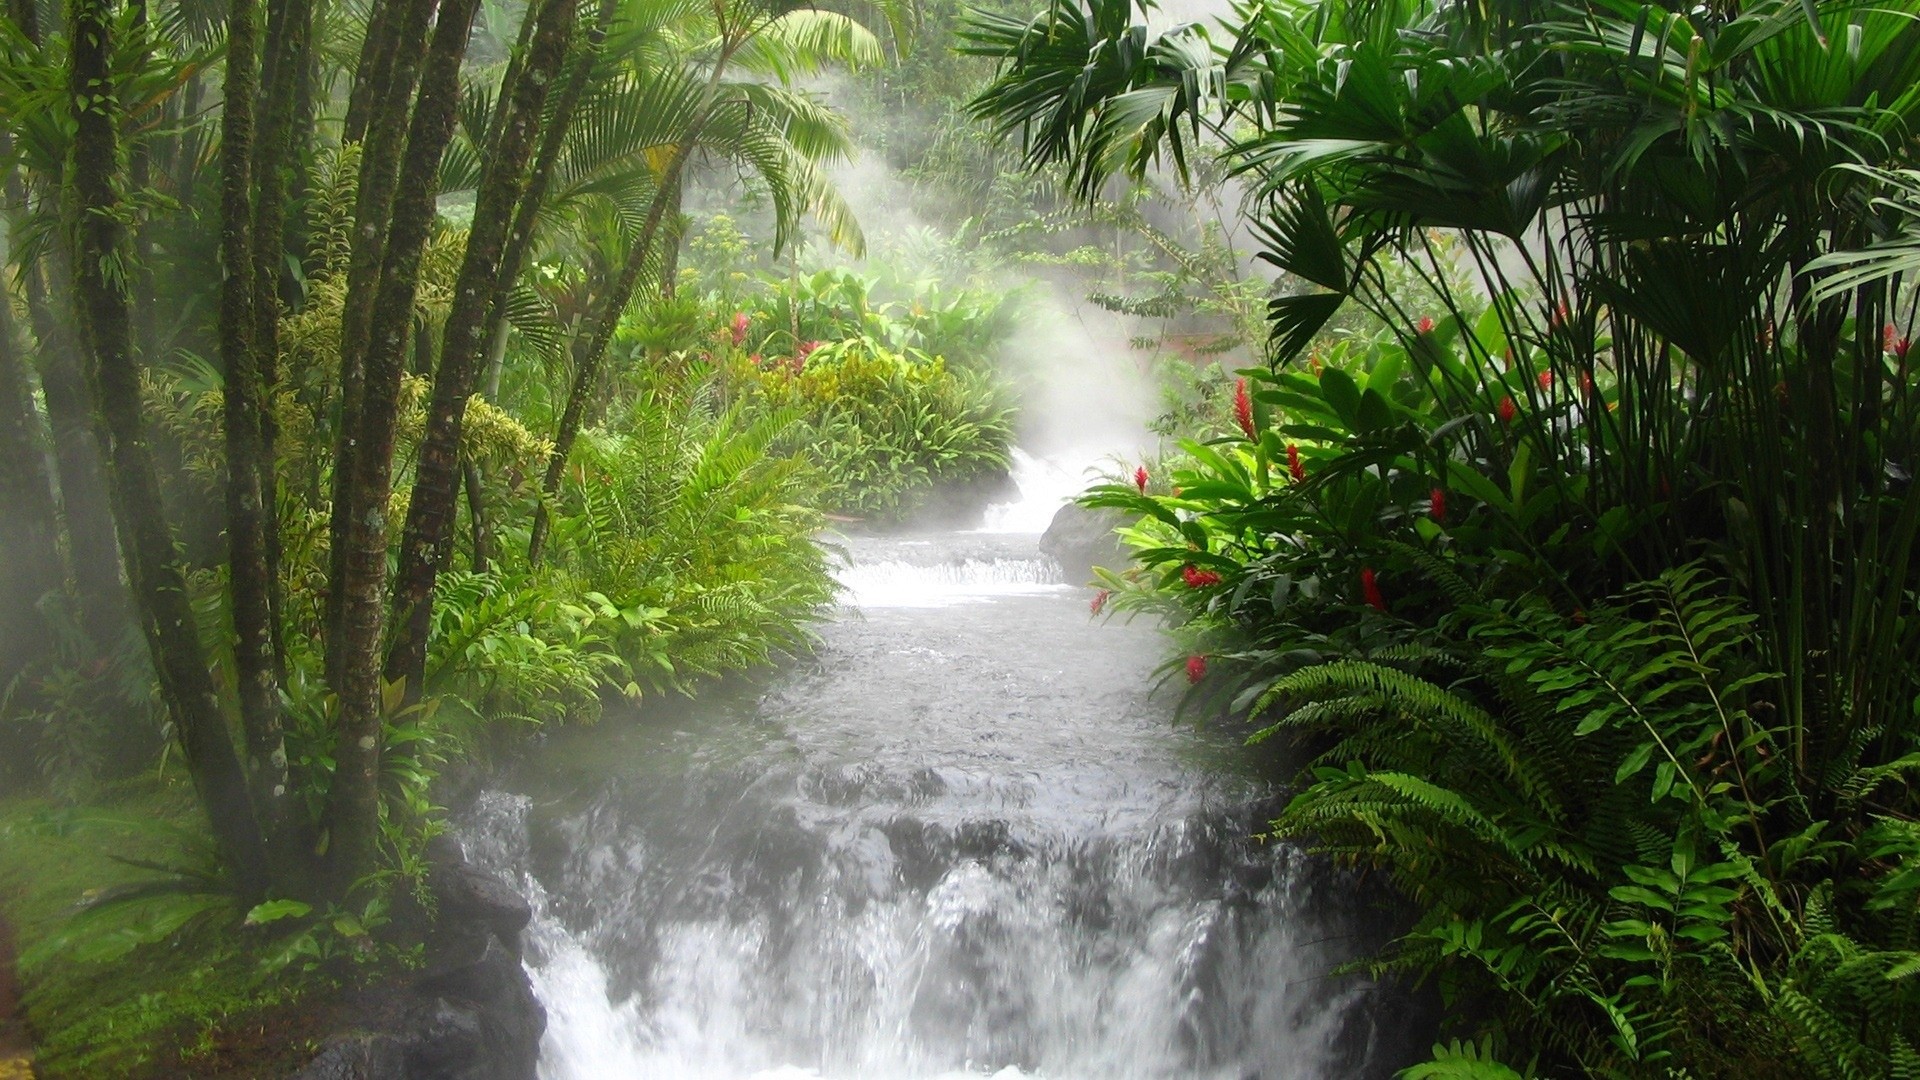 General 1920x1080 tropical tropical forest waterfall plants creeks flowers trees water